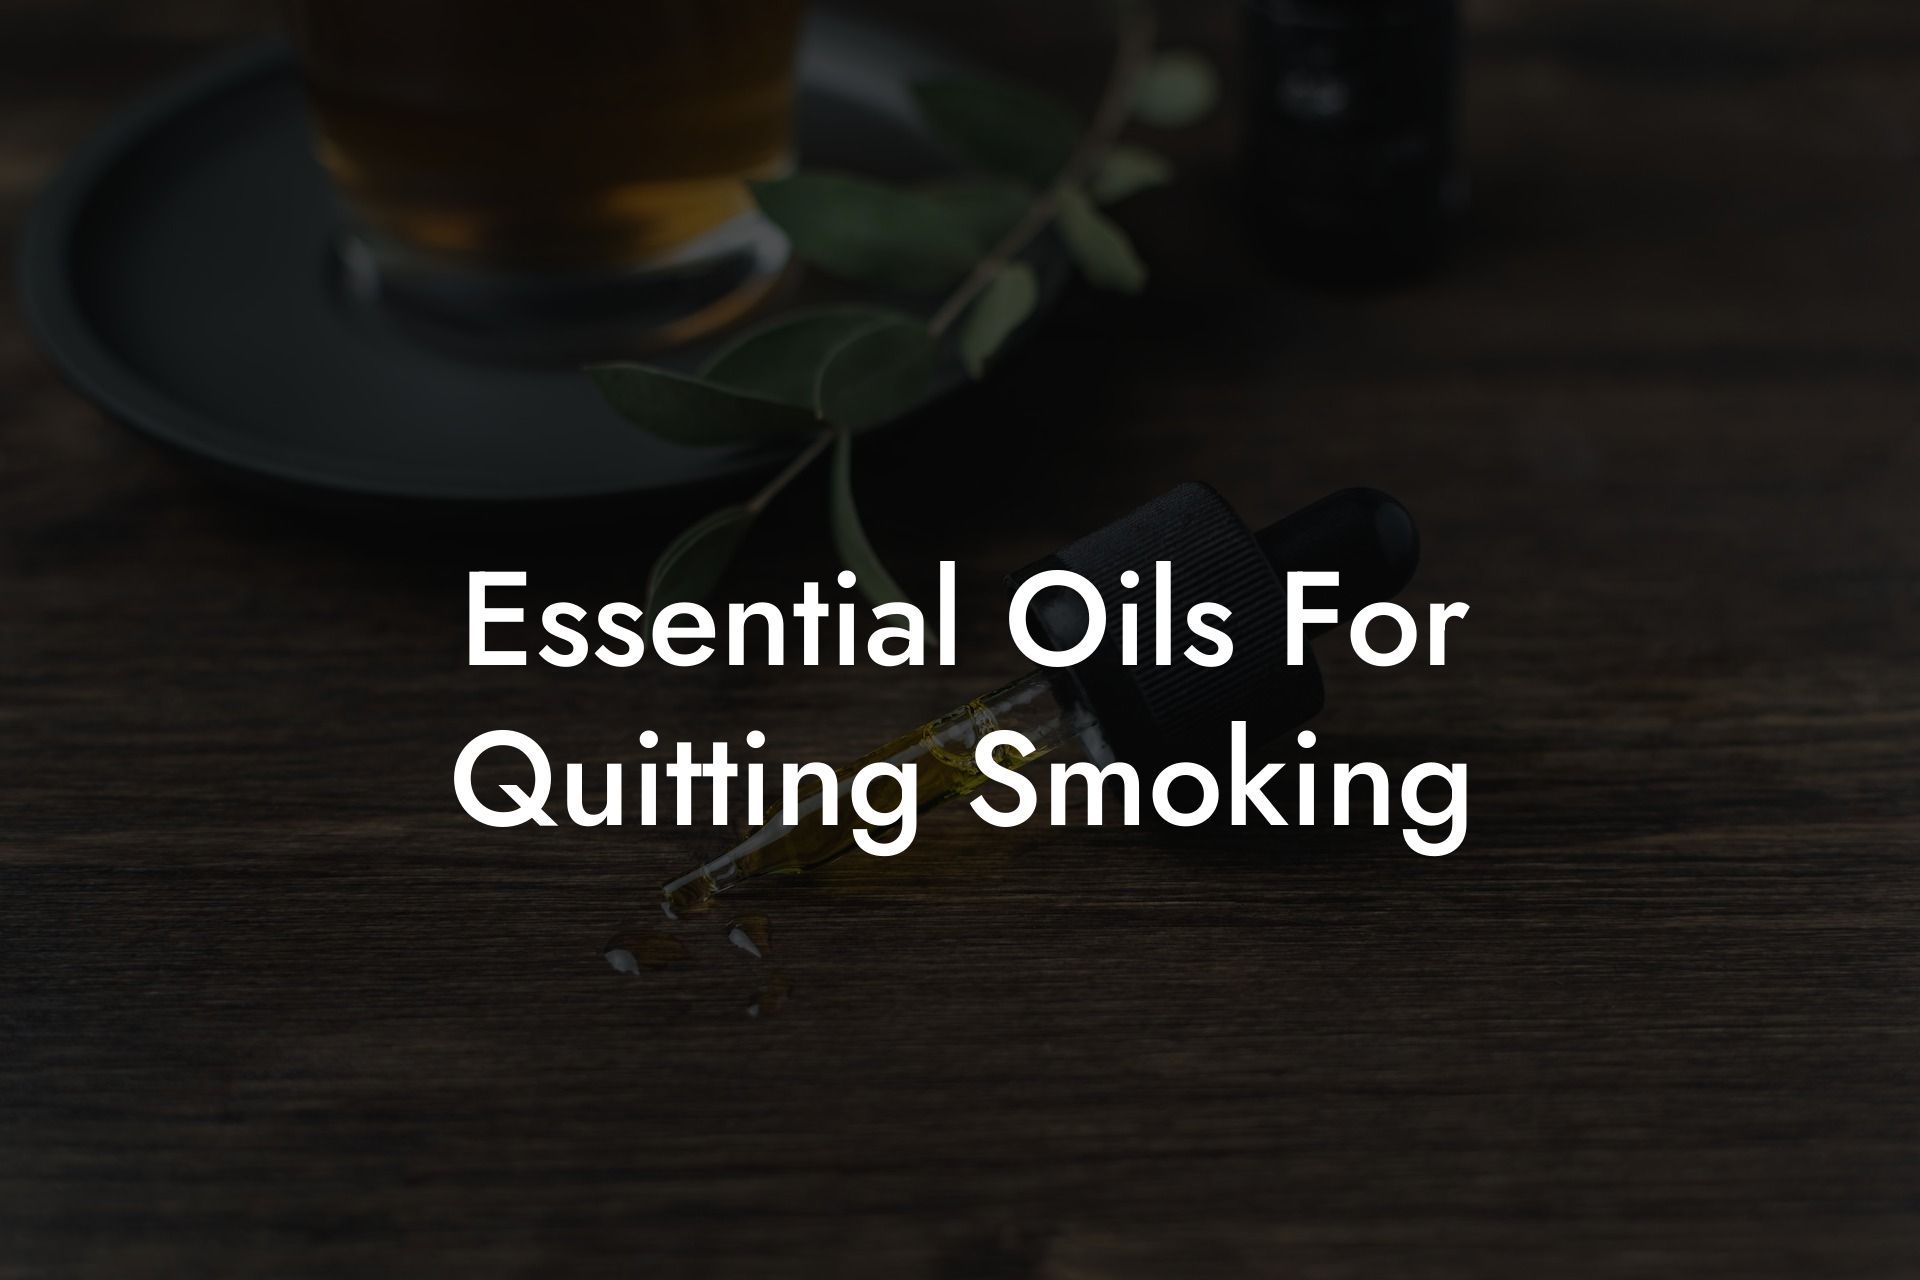 Essential Oils For Quitting Smoking